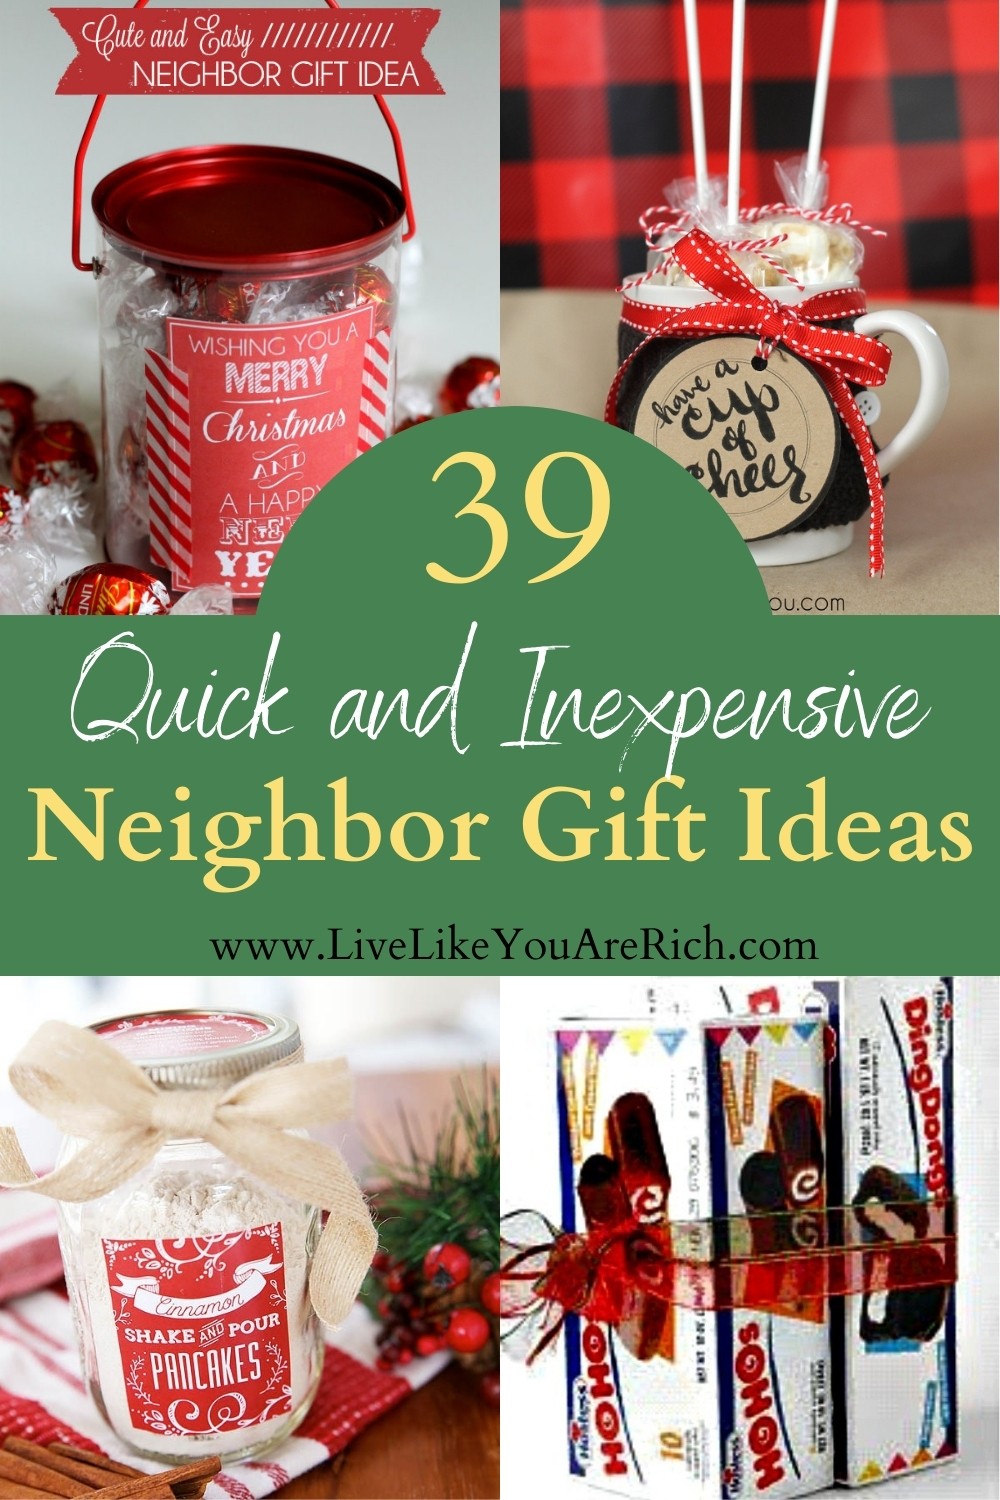 Quick and Inexpensive Neighbor Gifts for Christmas - Live Like You Are Rich